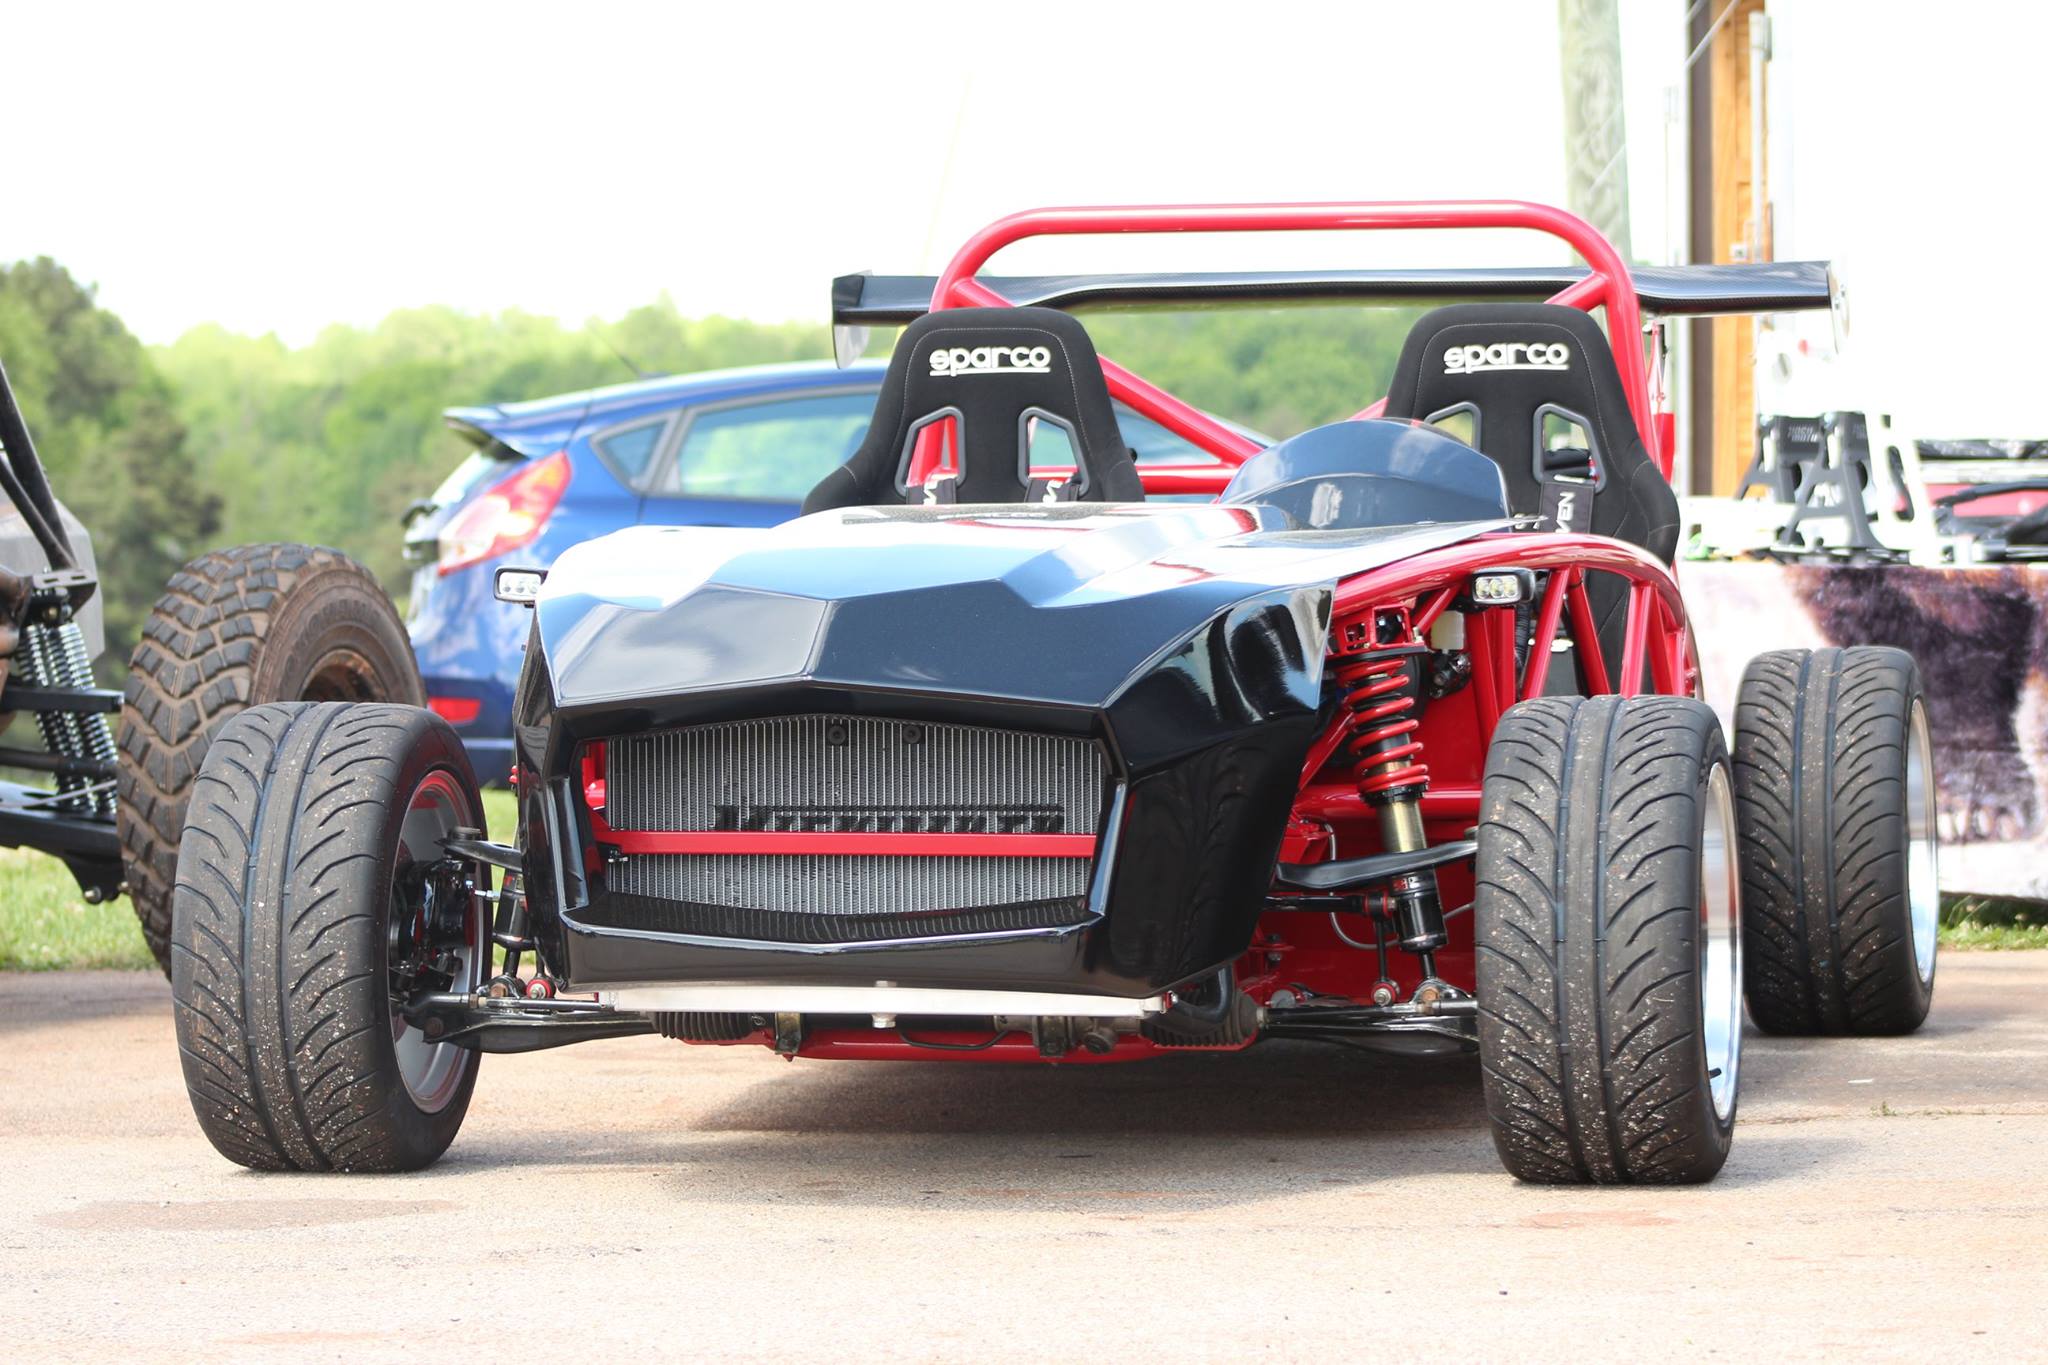 The newest Exocet is prepping for the Skidpad Challenge